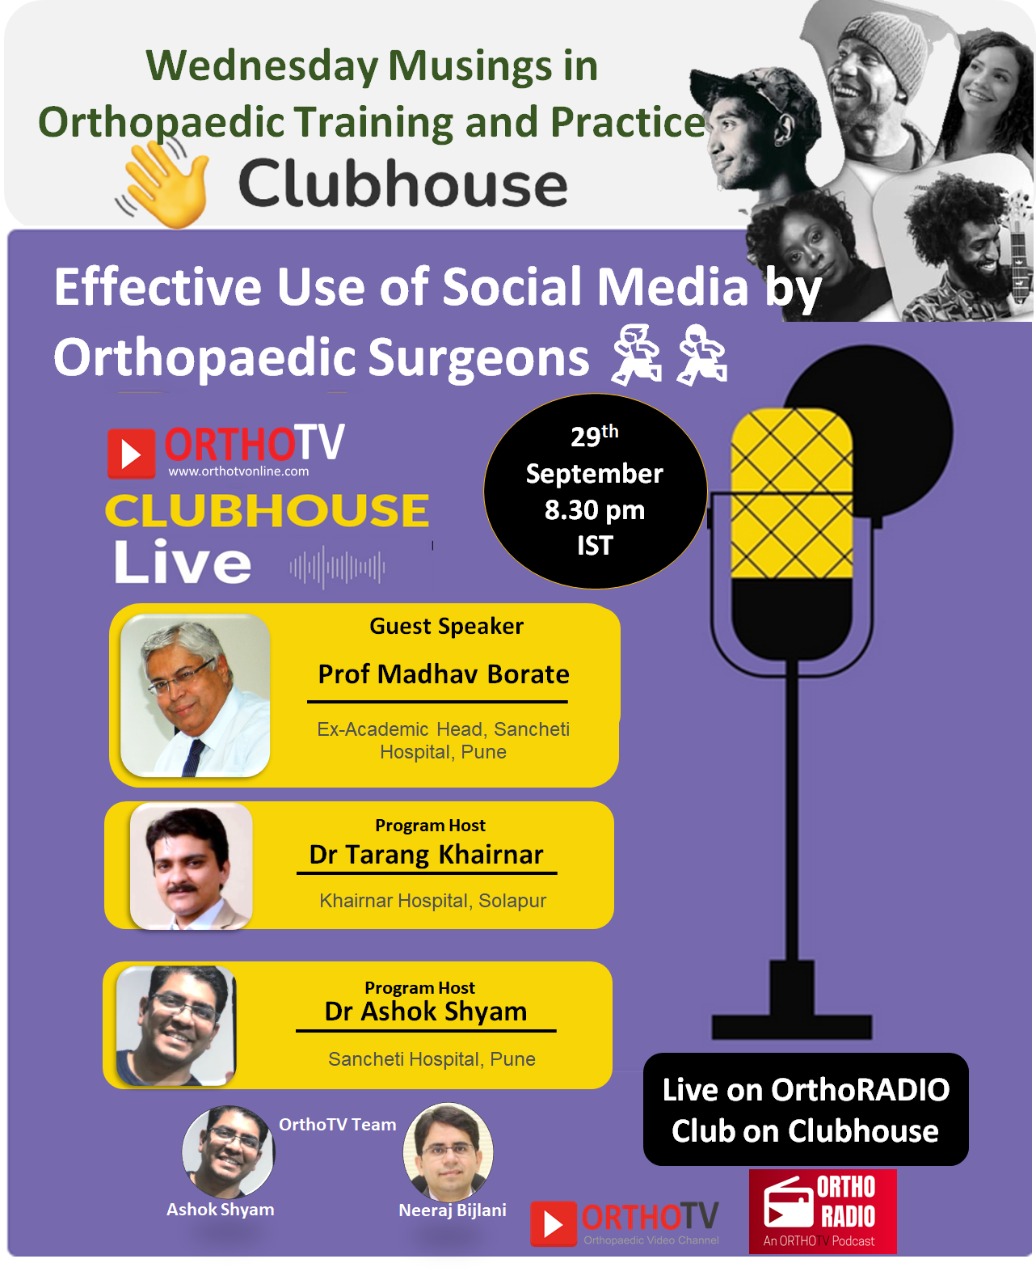 Wednesday Musing: Effective Use of Social Media by Orthopaedic Surgeons Dr Madhav Borate